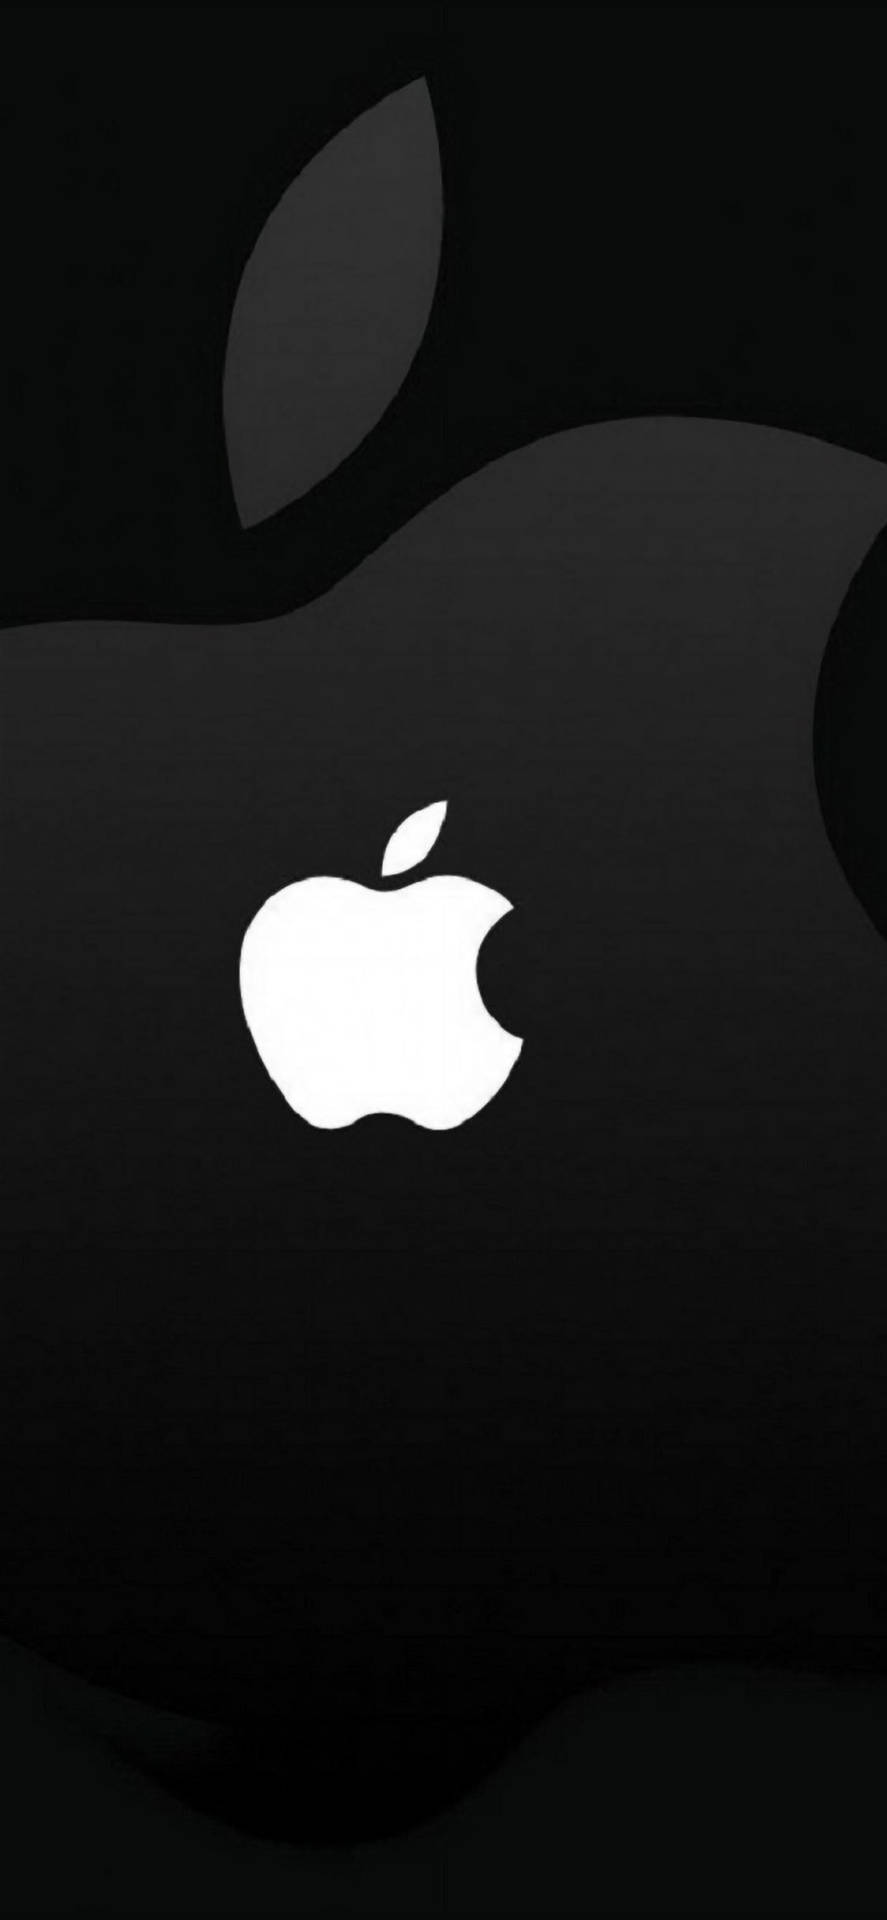 Simple Black Apple Iphone With Logo Wallpaper